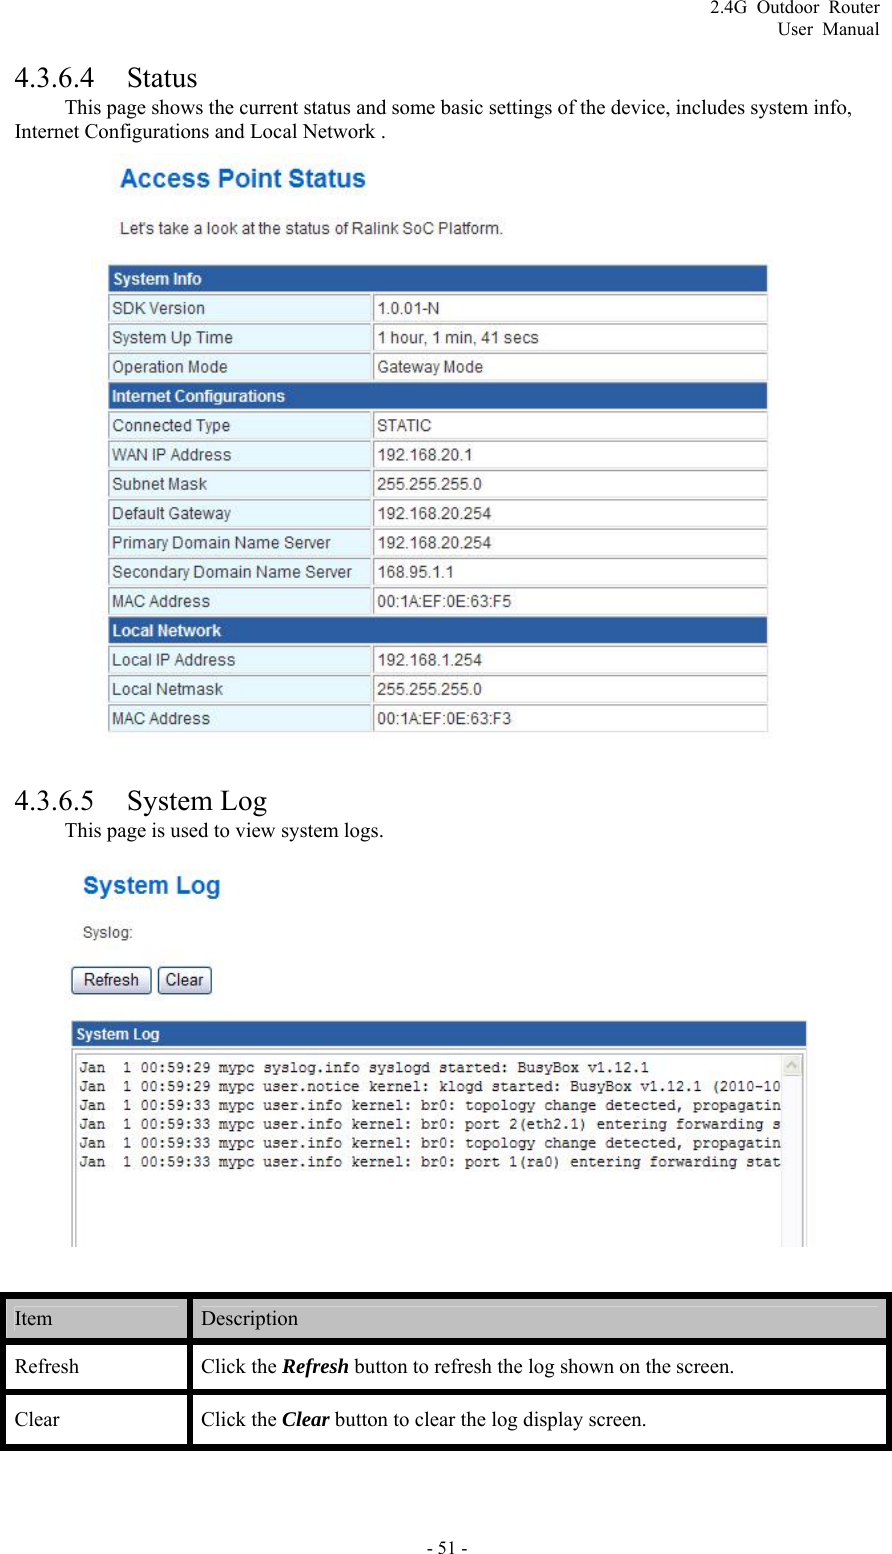 2.4G Outdoor Router User Manual 4.3.6.4 Status This page shows the current status and some basic settings of the device, includes system info, Internet Configurations and Local Network .  4.3.6.5 System Log This page is used to view system logs.   Item   Description  Refresh   Click the Refresh button to refresh the log shown on the screen.   Clear   Click the Clear button to clear the log display screen.    - 51 - 